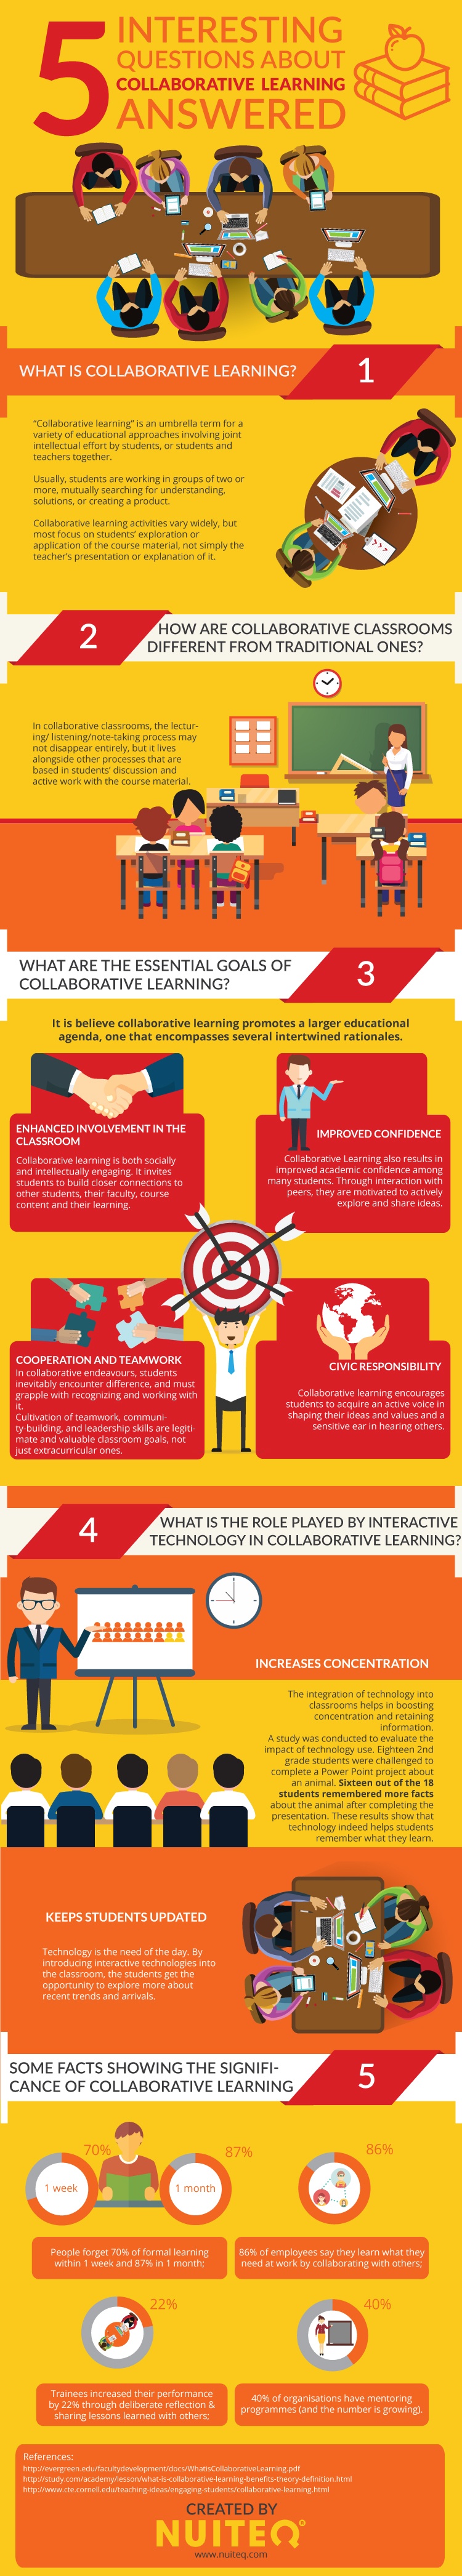 Questions and Answers about Collaborative Learning Infographic